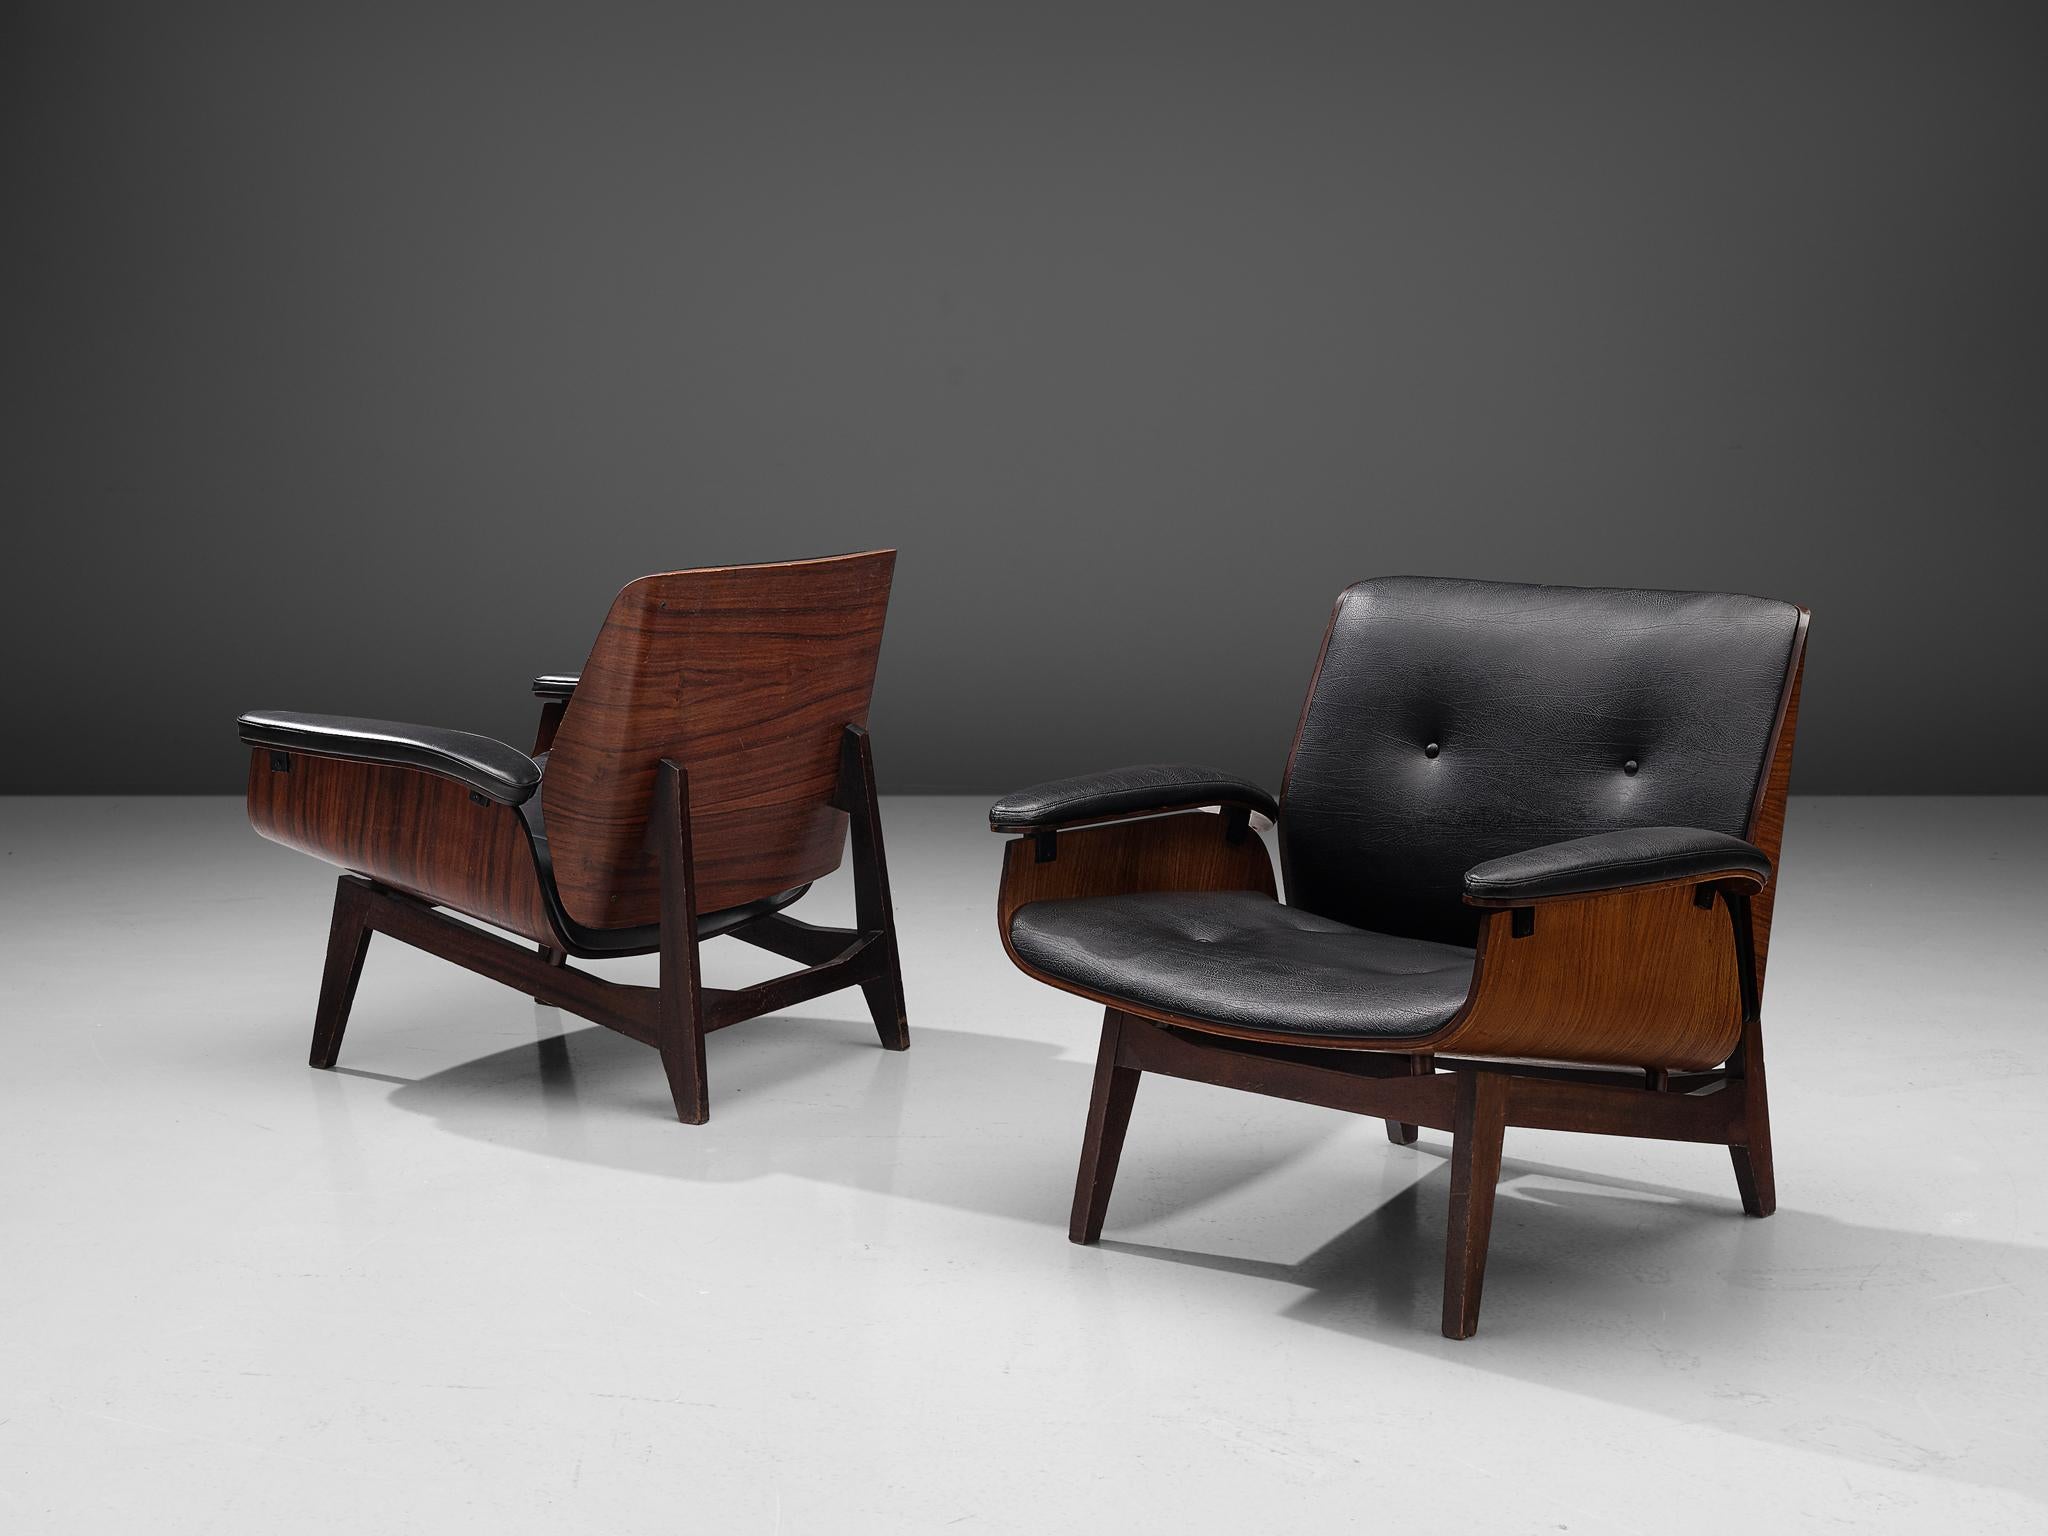 Ico Parisi MIM Roma, pair of lounge chairs, rosewood, black faux leather, Italy, 1960s.

Pair of armchair with rosewood frame and orange fabric upholstery. Signature chair by MIM Roma. The seating and back are nicely curved and mirrored to each